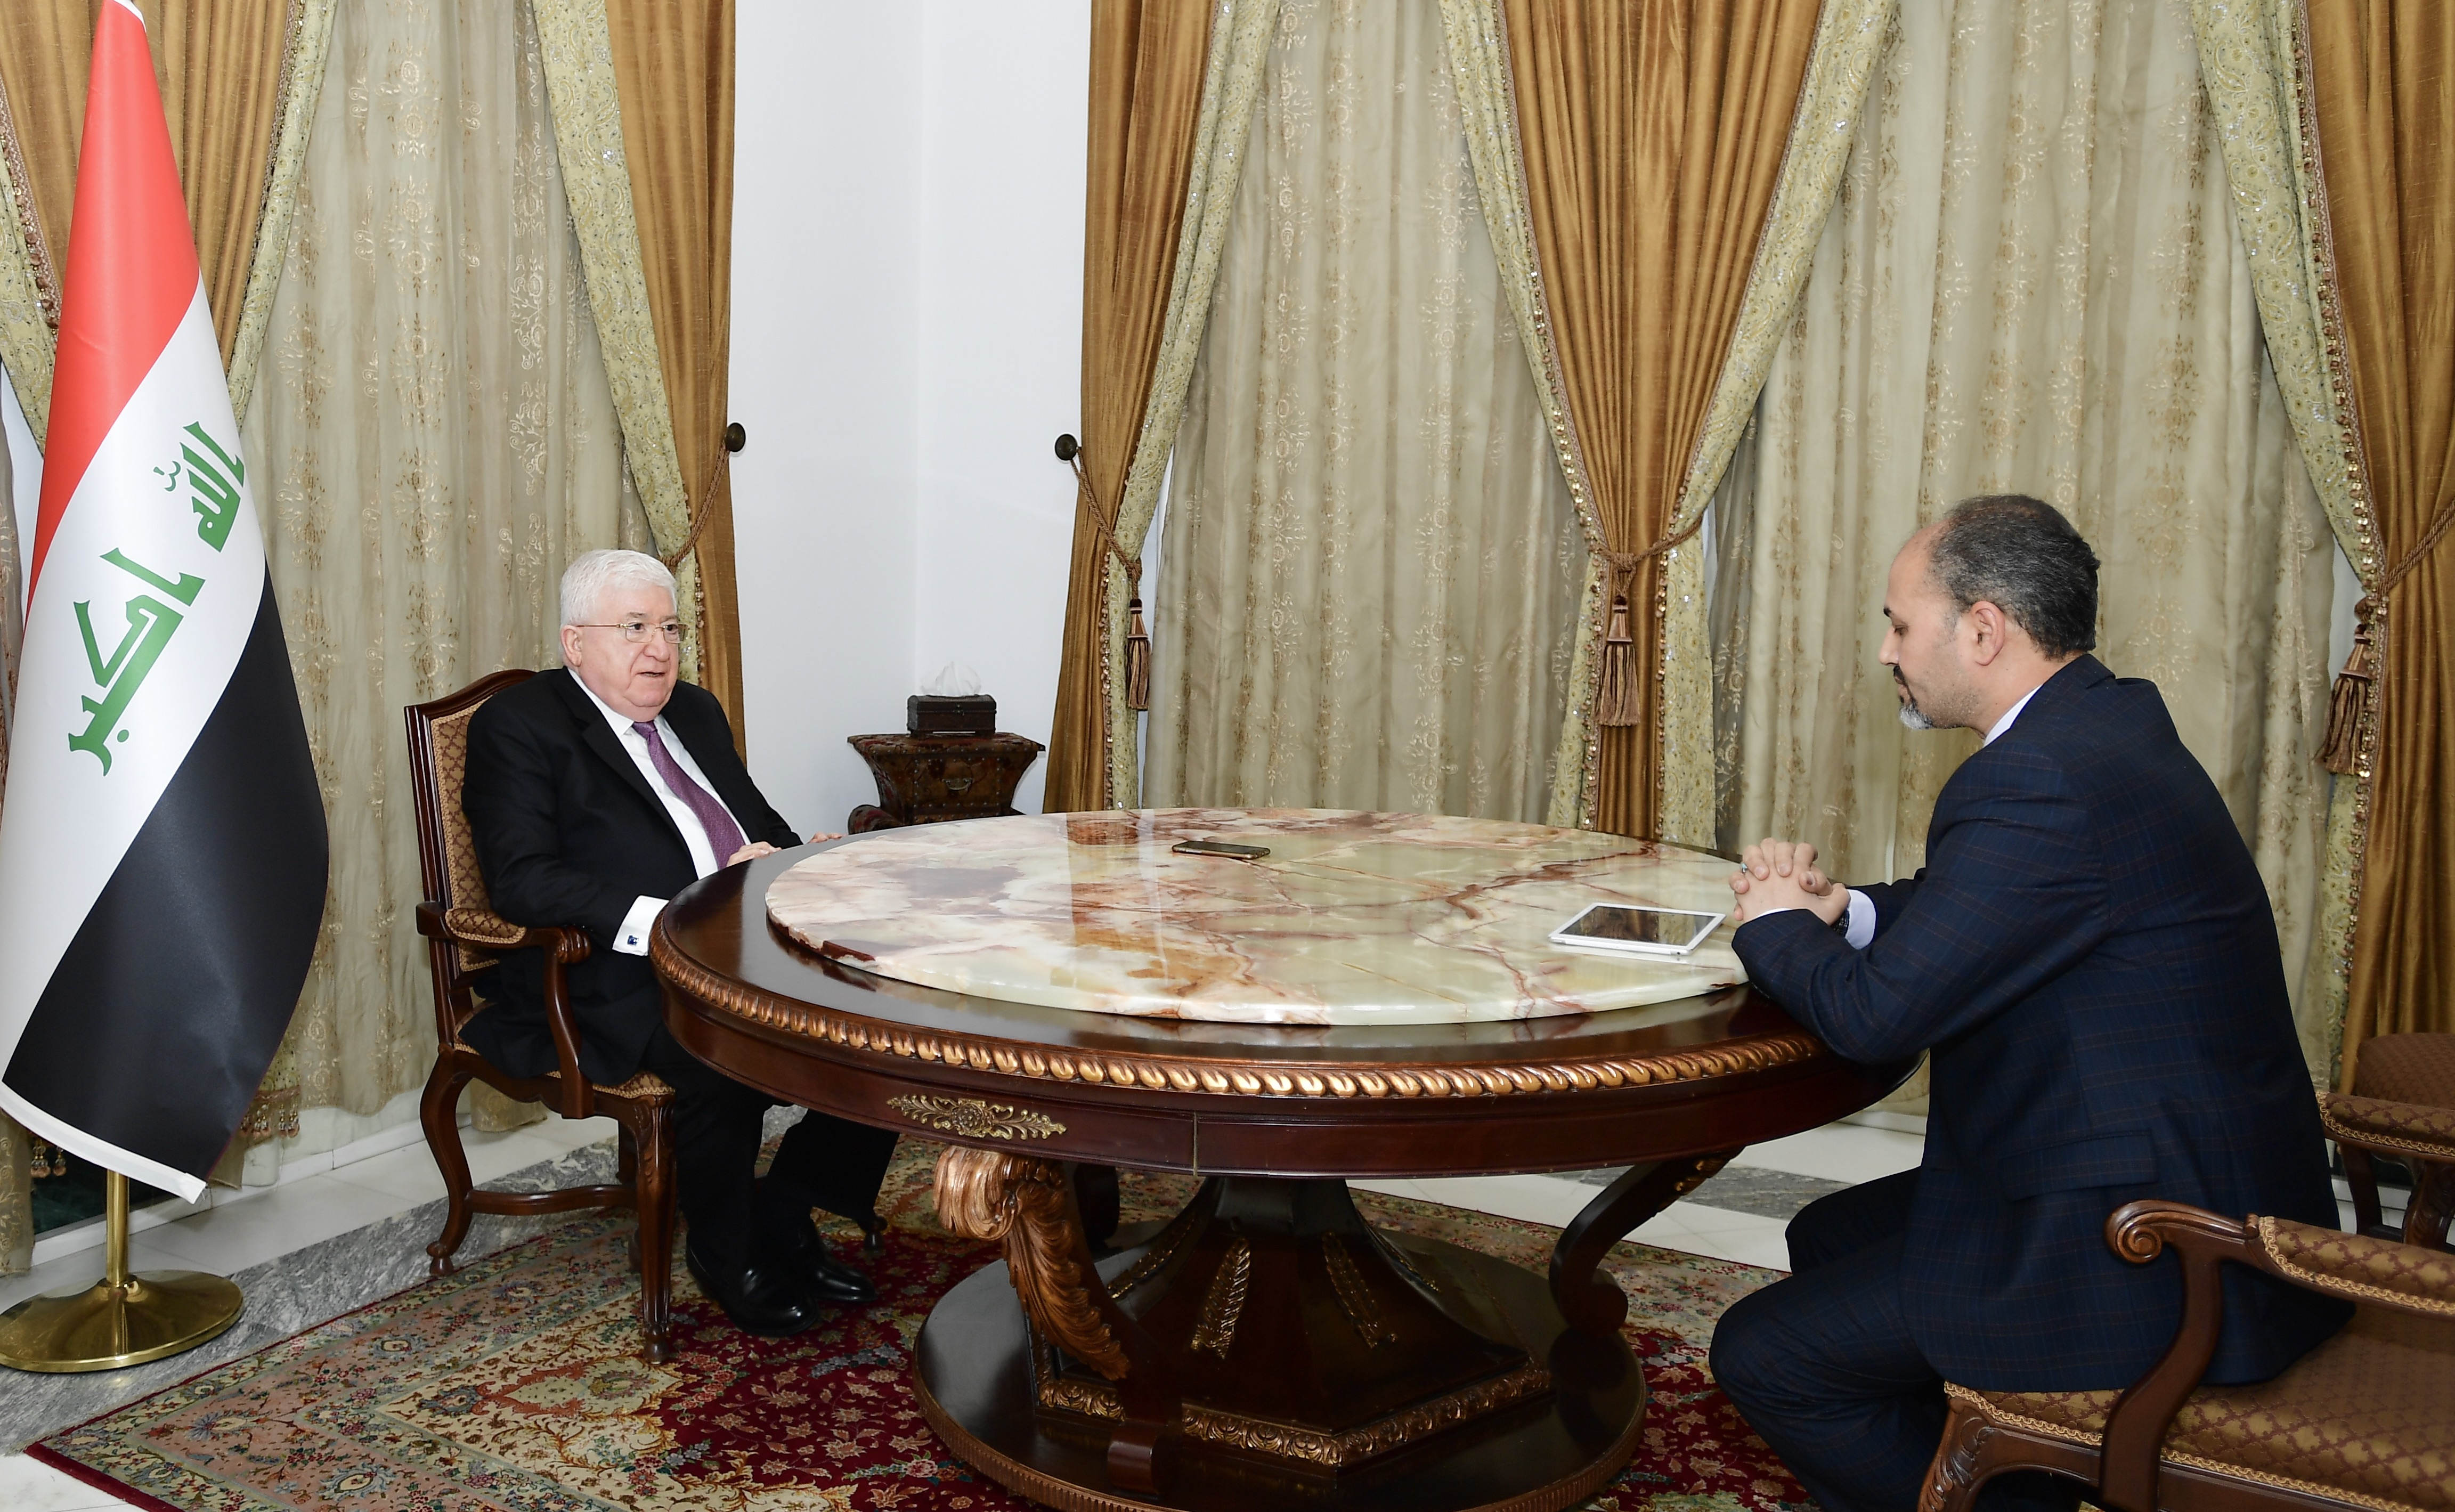 Iraqi President Fuad Masum in an interview with KUNA